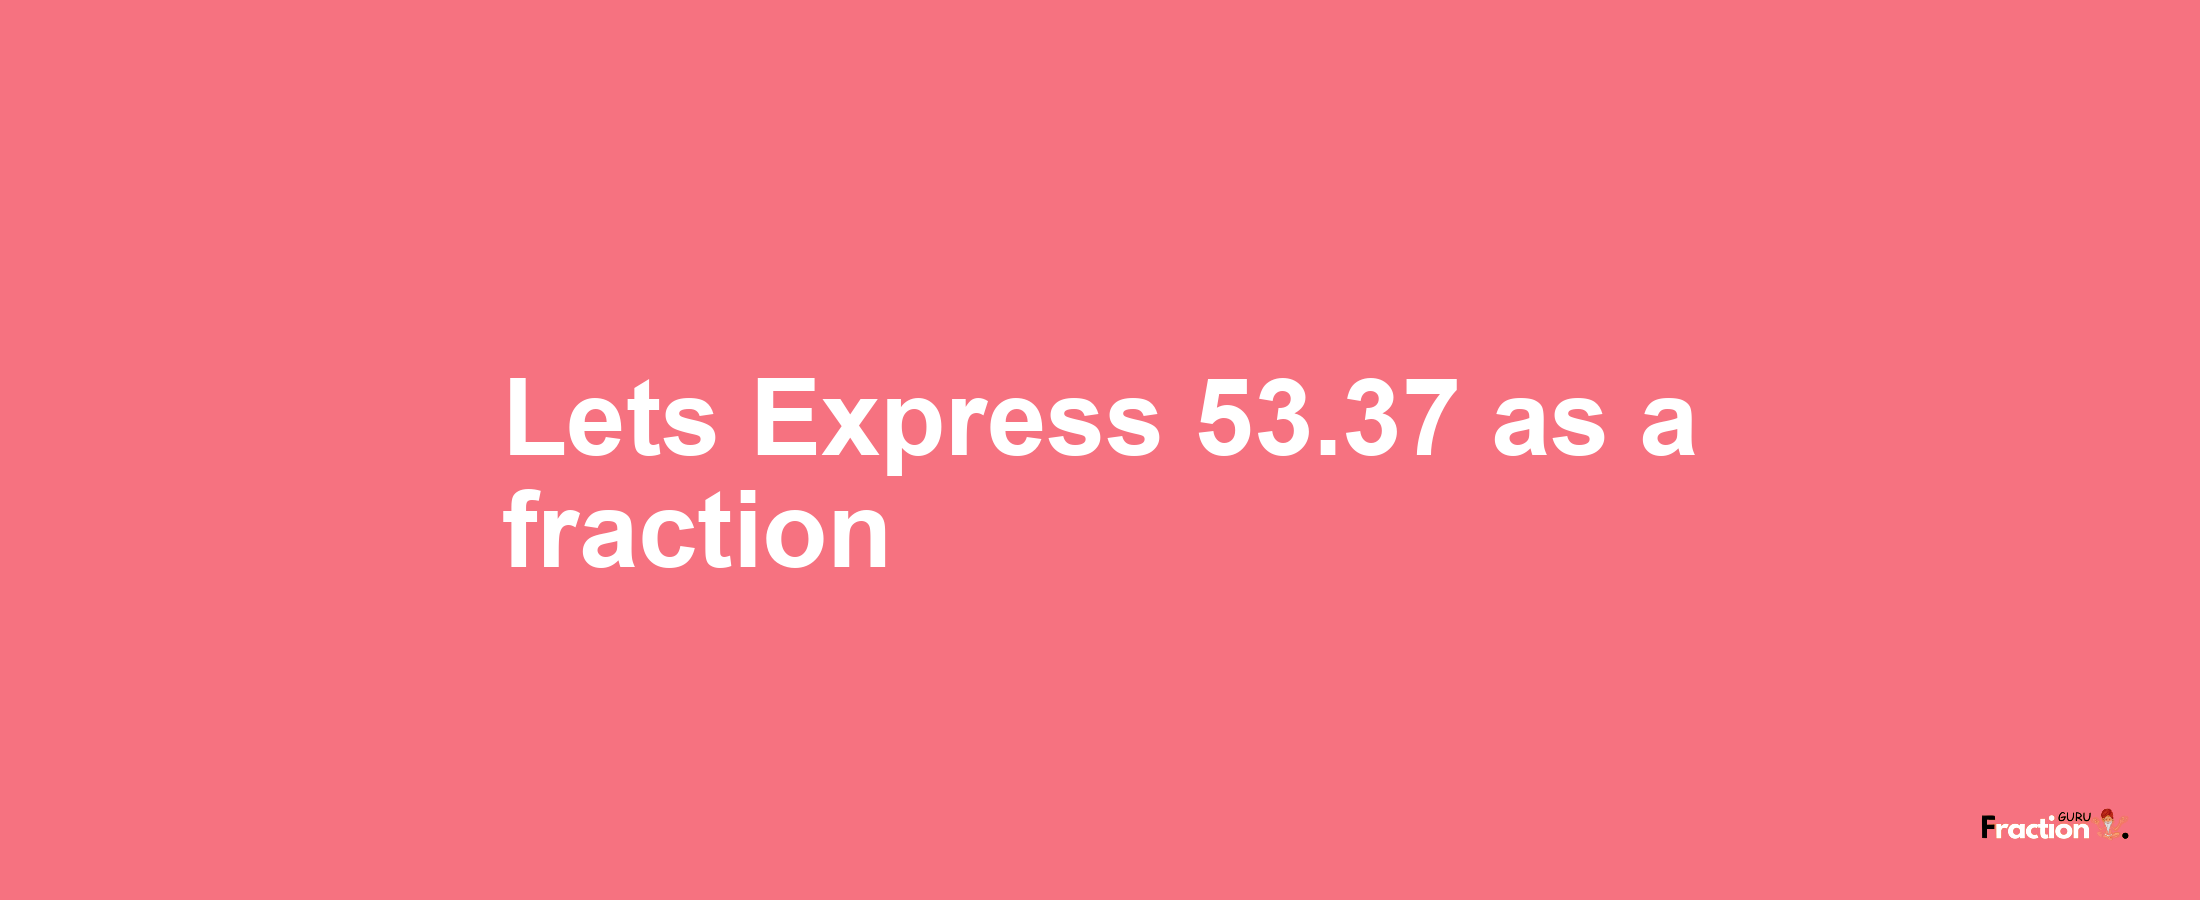 Lets Express 53.37 as afraction